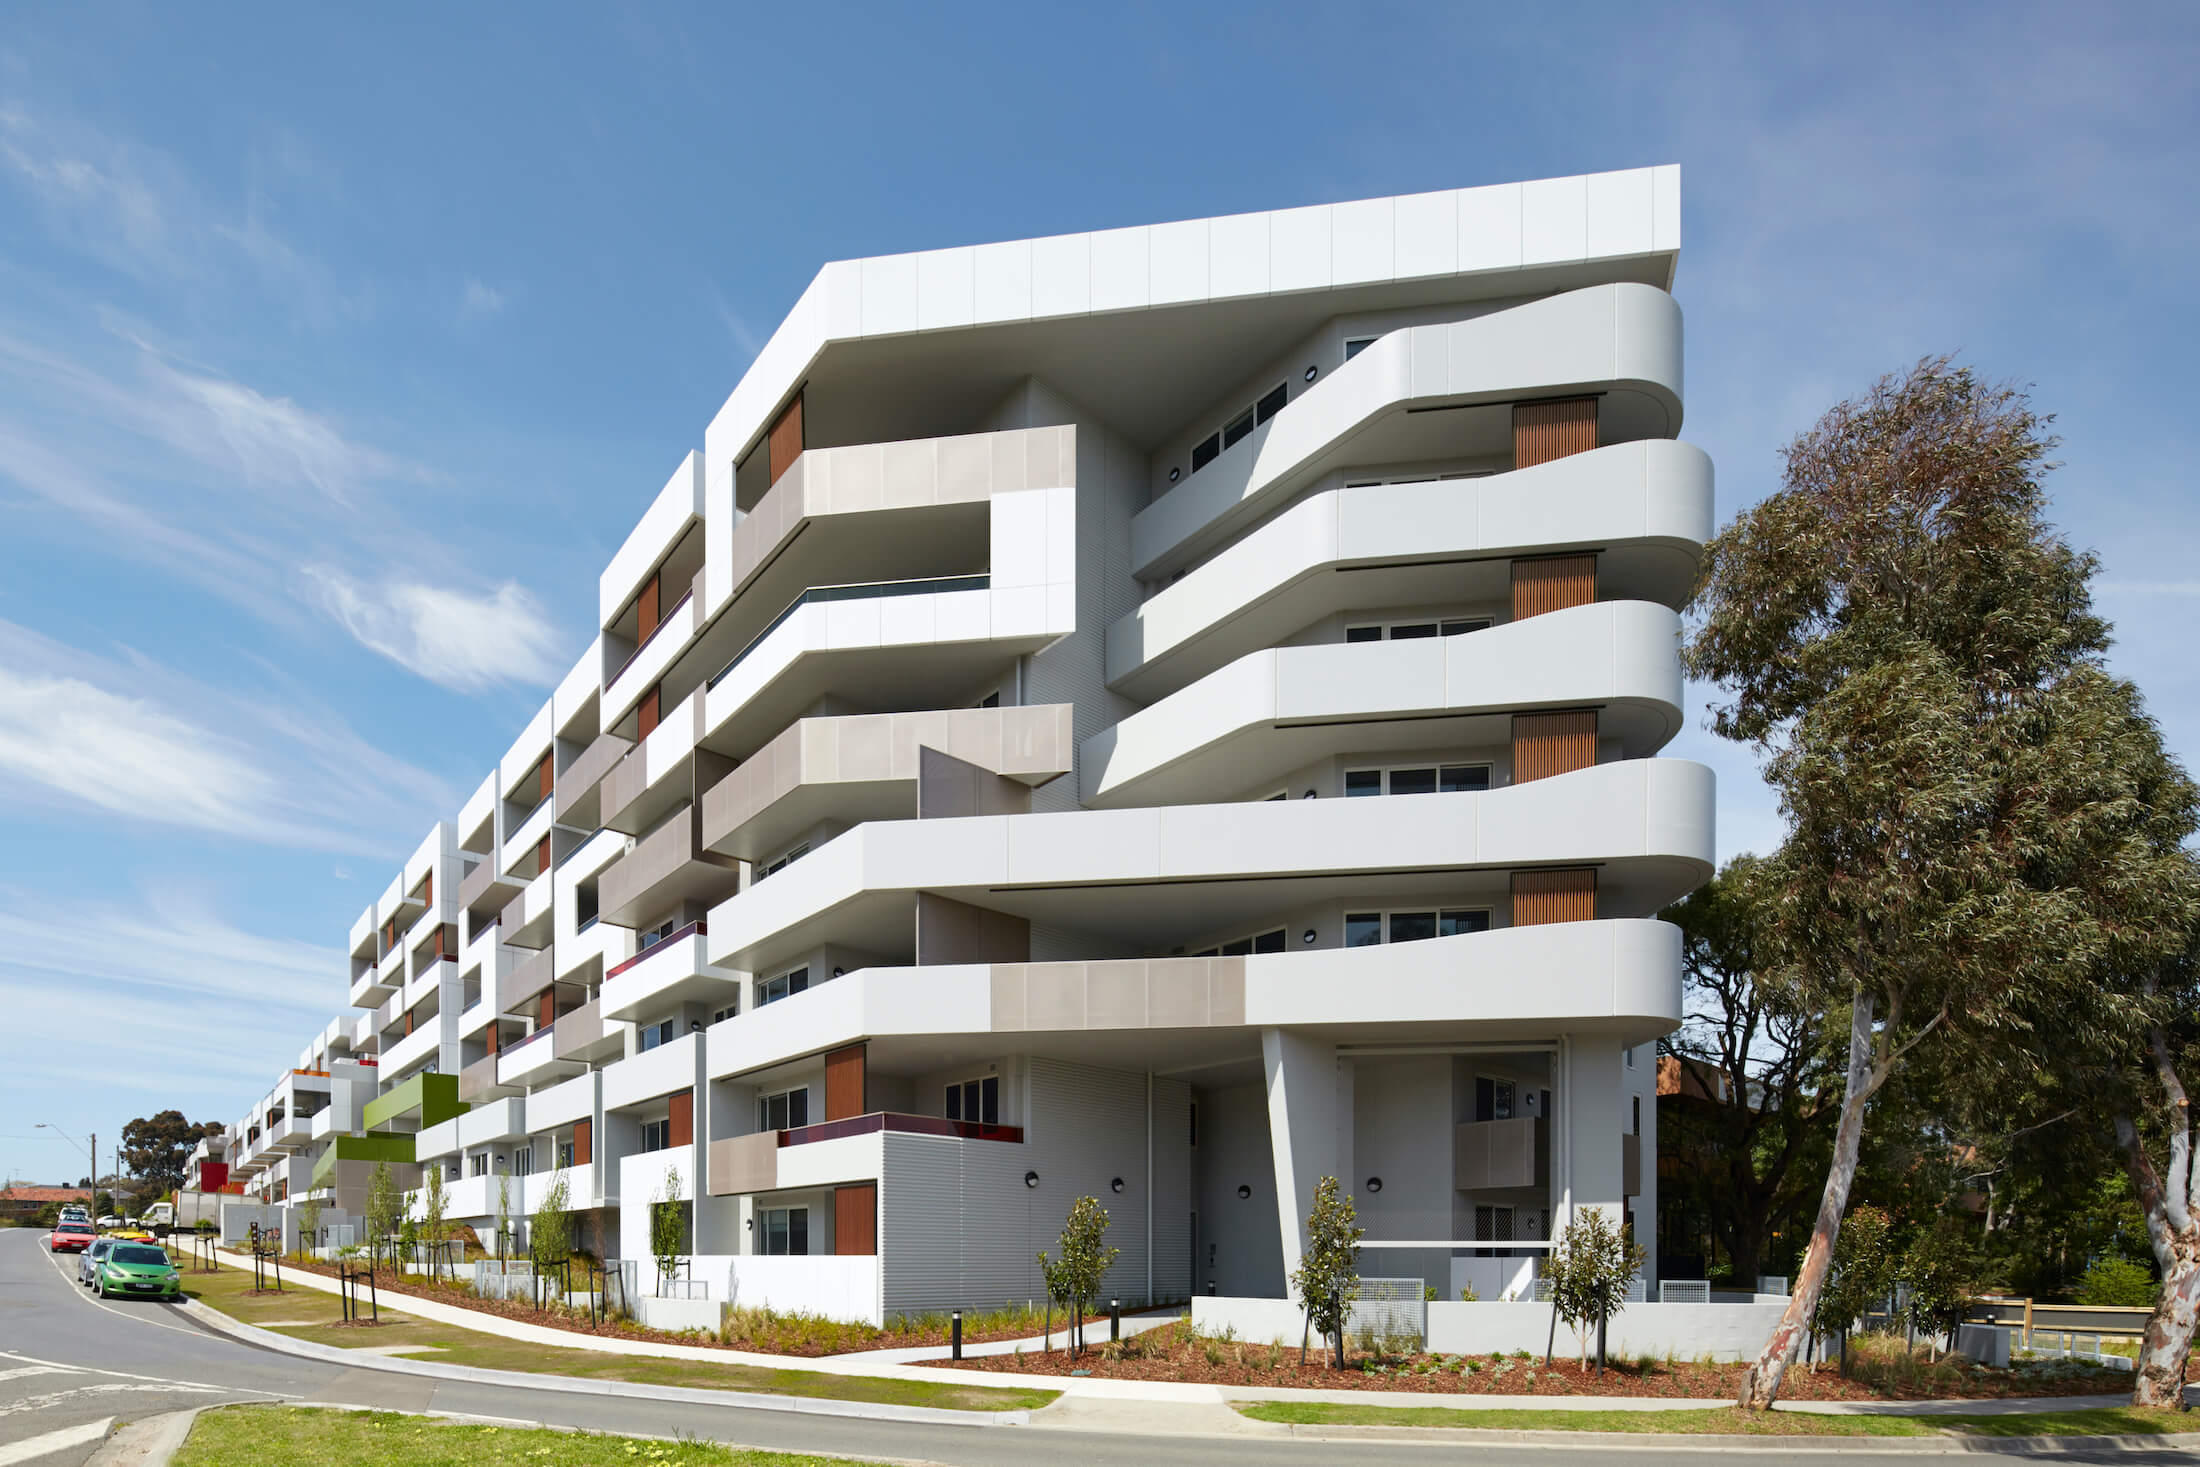 A multi-level apartment building with native landscaping and a curved end to the facade